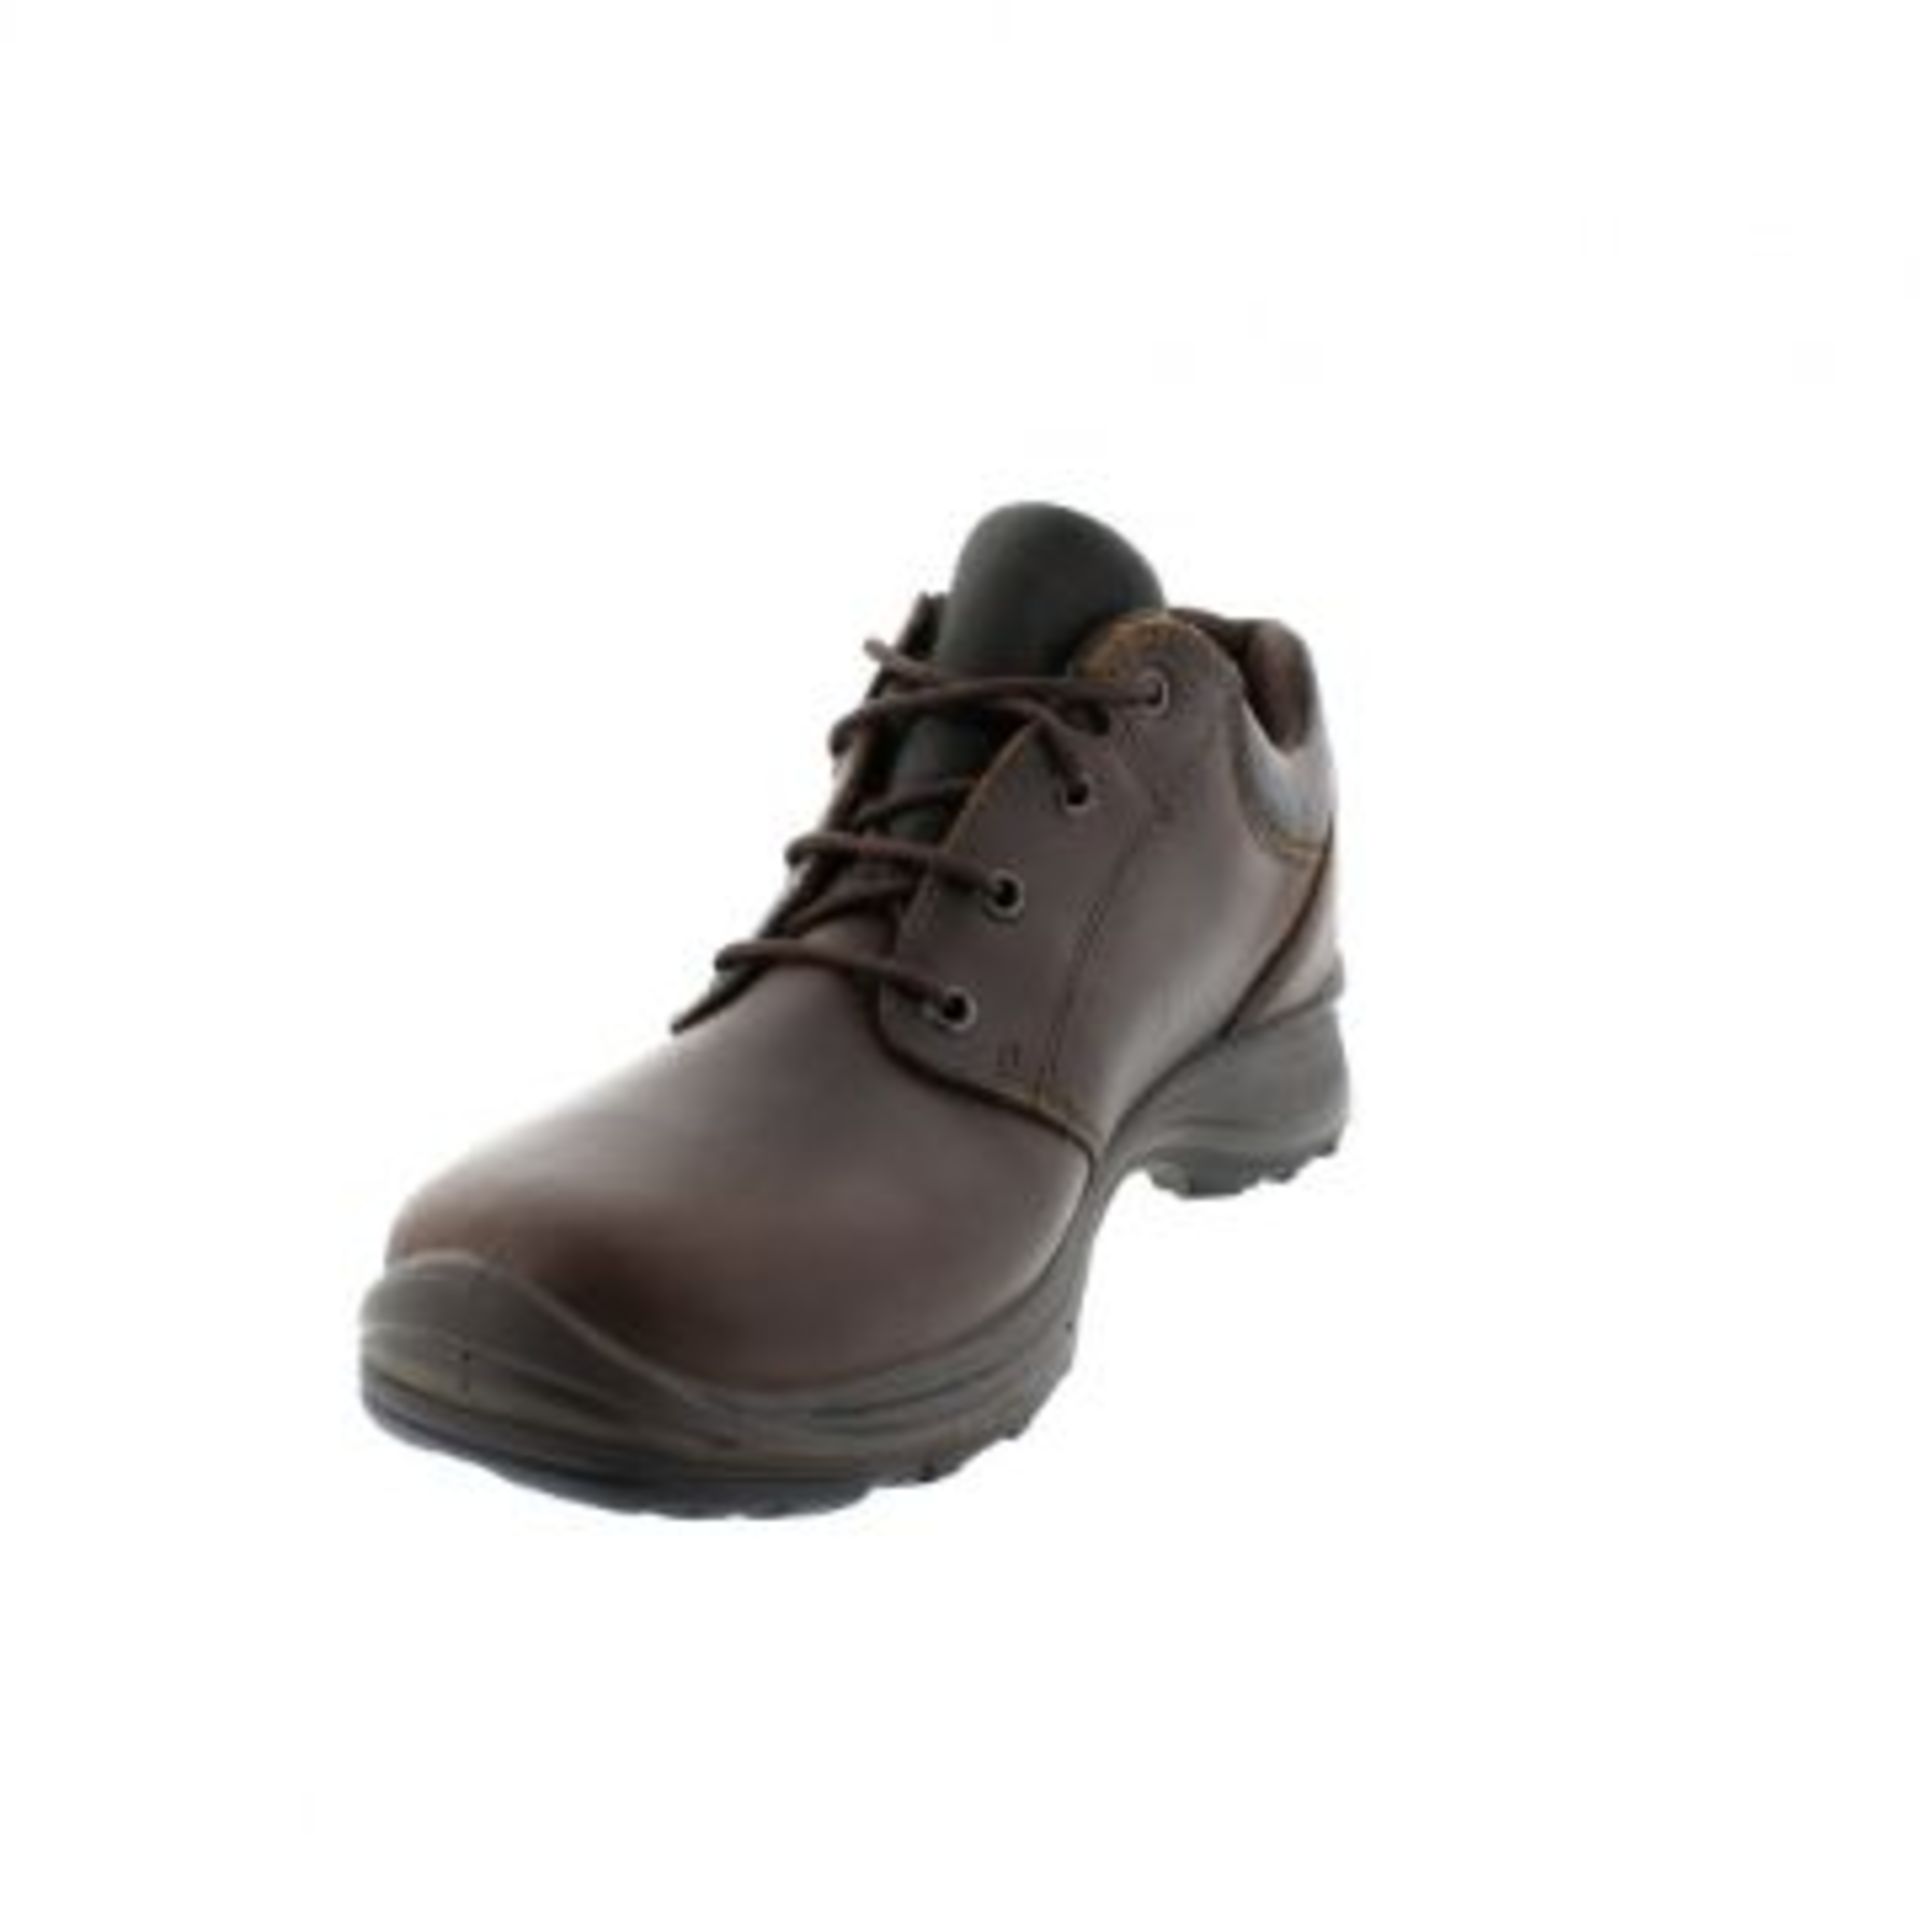 1 x Pair of Men's Grisport Brown Leather GriTex Shoes - Rogerson Footwear - Brand New and Boxed - - Image 4 of 5